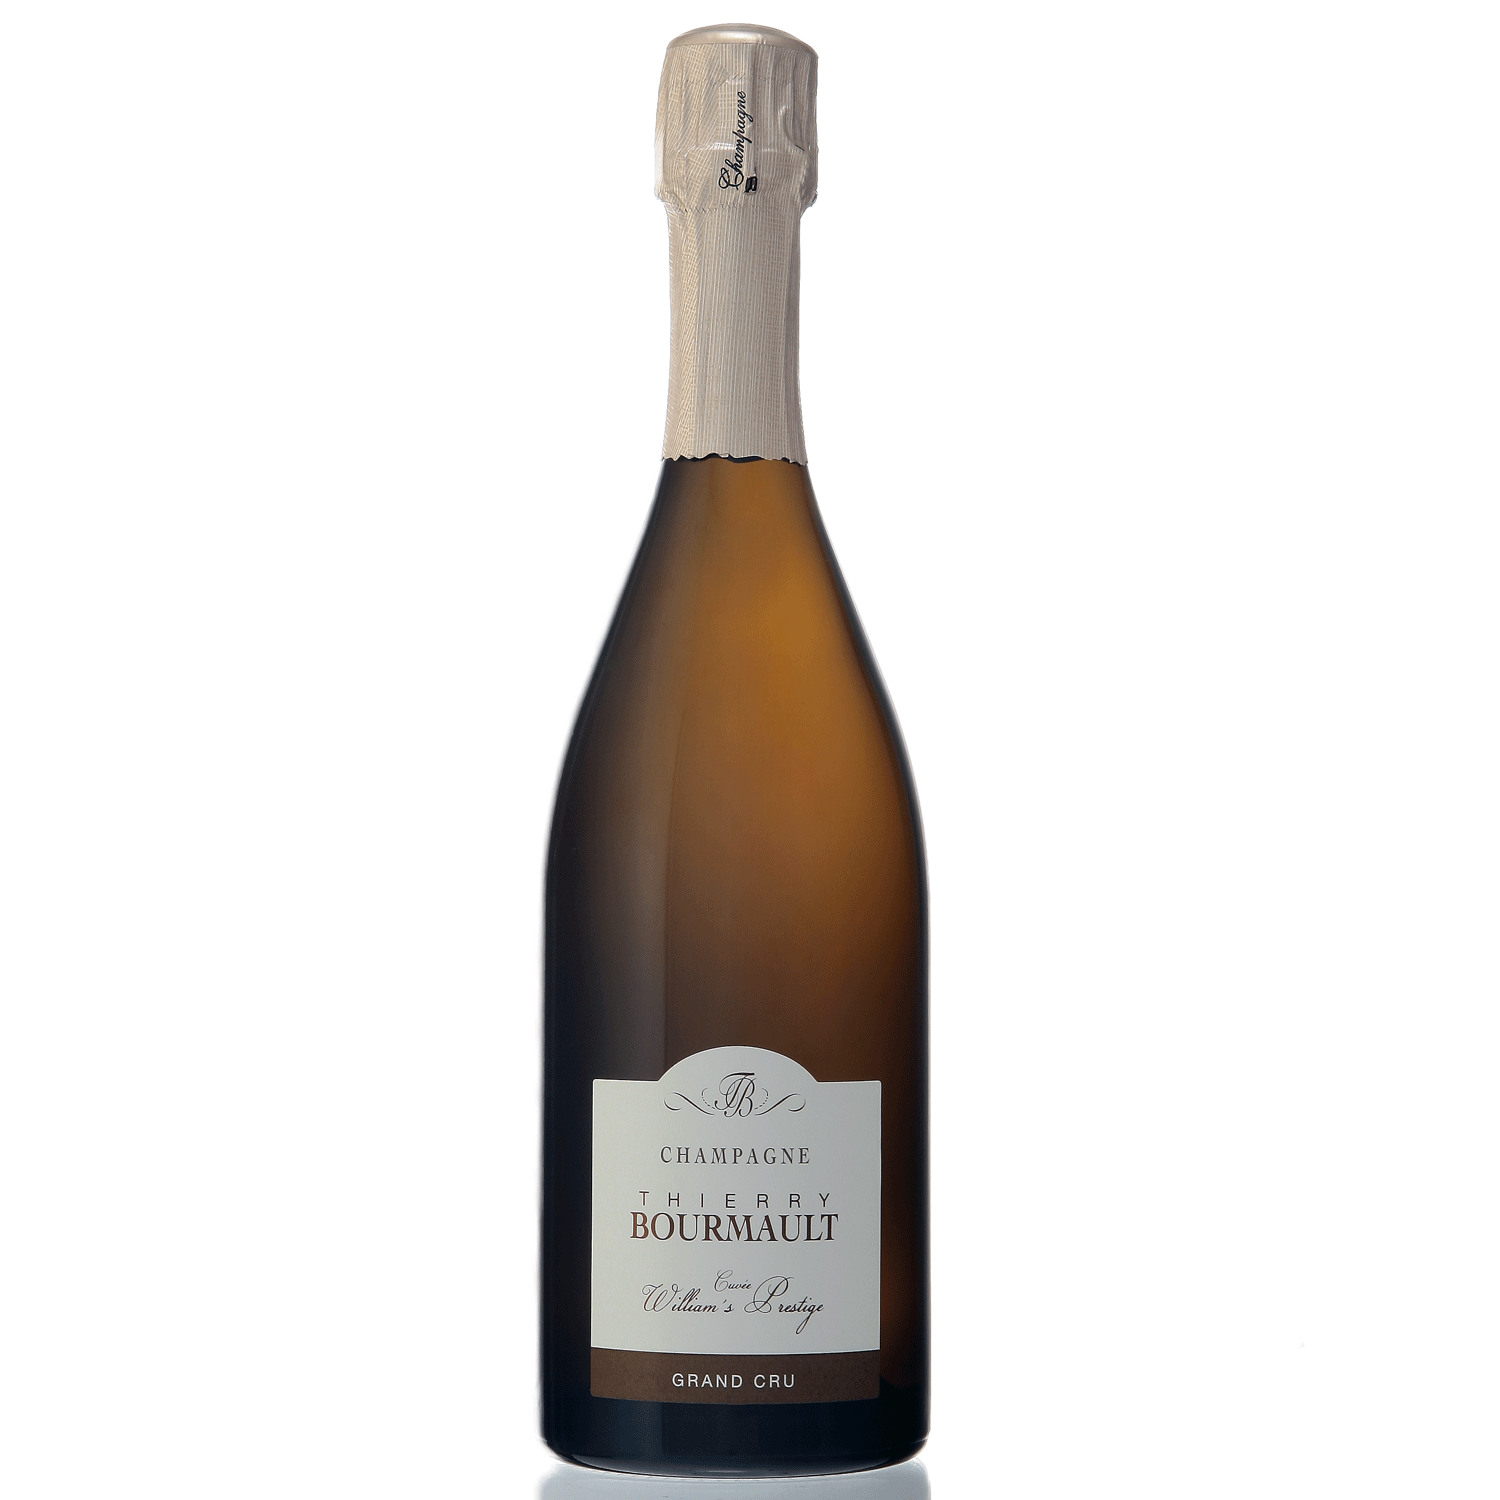 Champagne Thierry Bourmault: Cuvée William's - Grand Cru